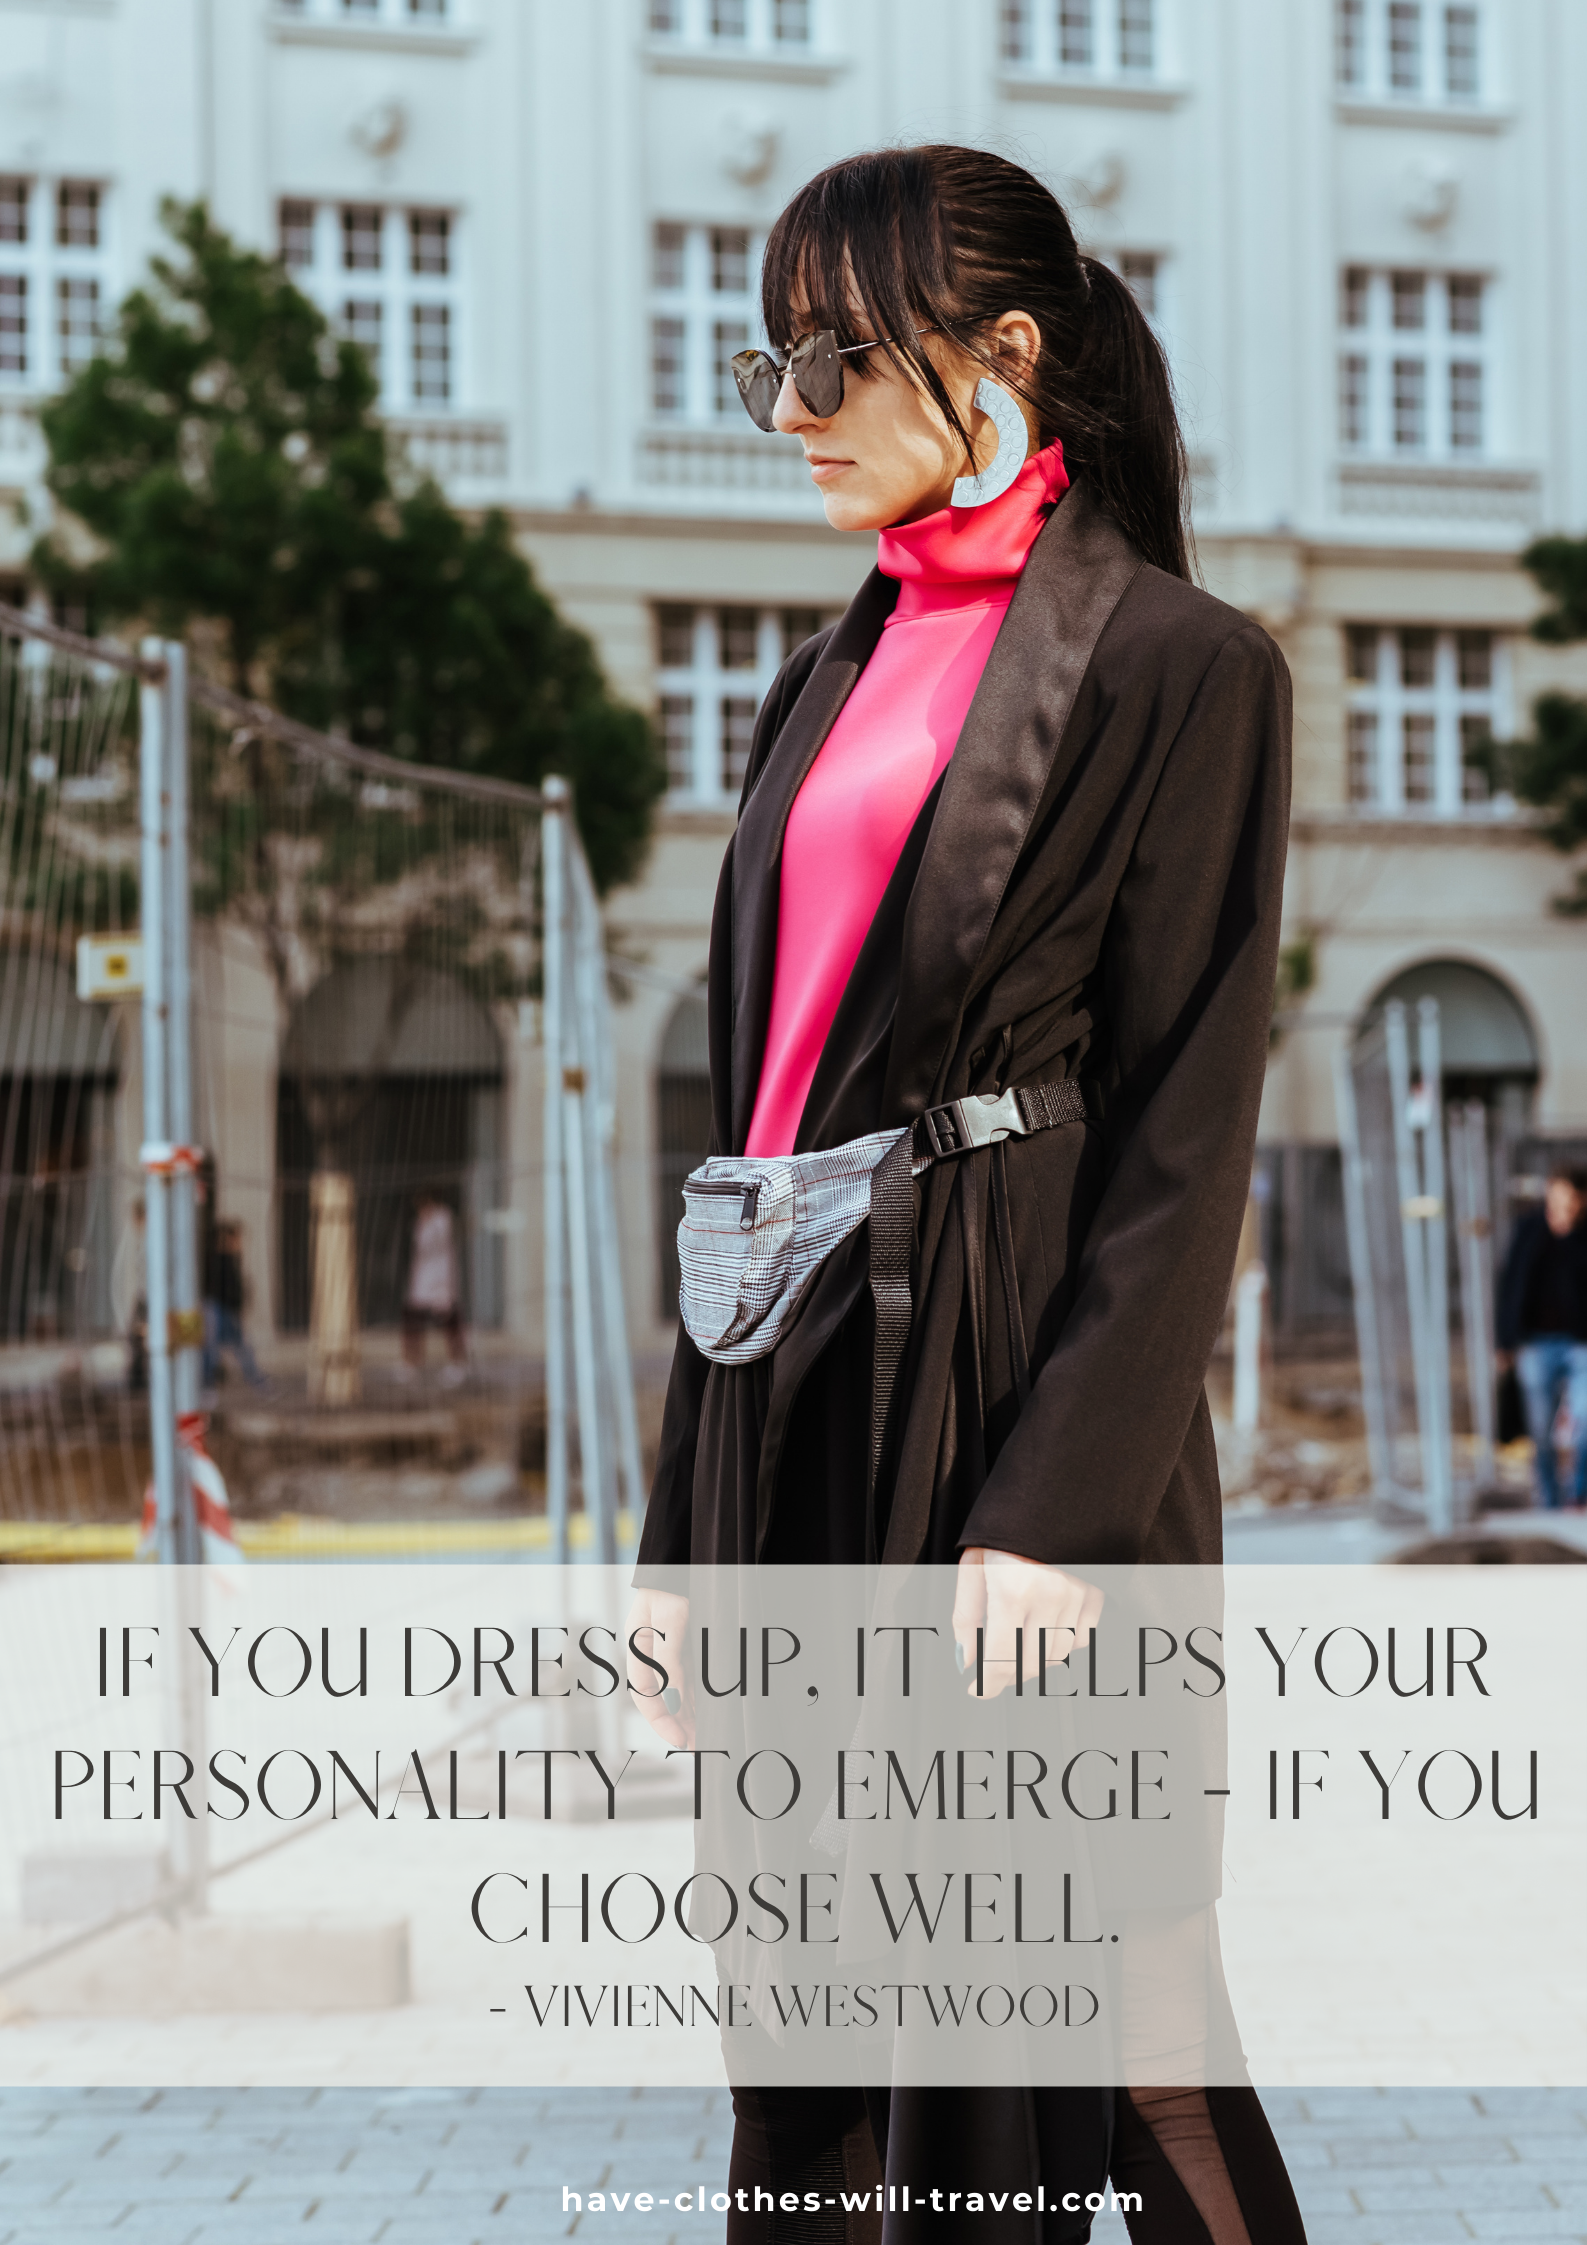 A stylish woman poses outside in a city street wearing a pink turtleneck shirt, black coat, and black pants. Text across the bottom of the image says, "If you dress up, it helps your personality to emerge - if you choose well. - Vivienne Westwood"